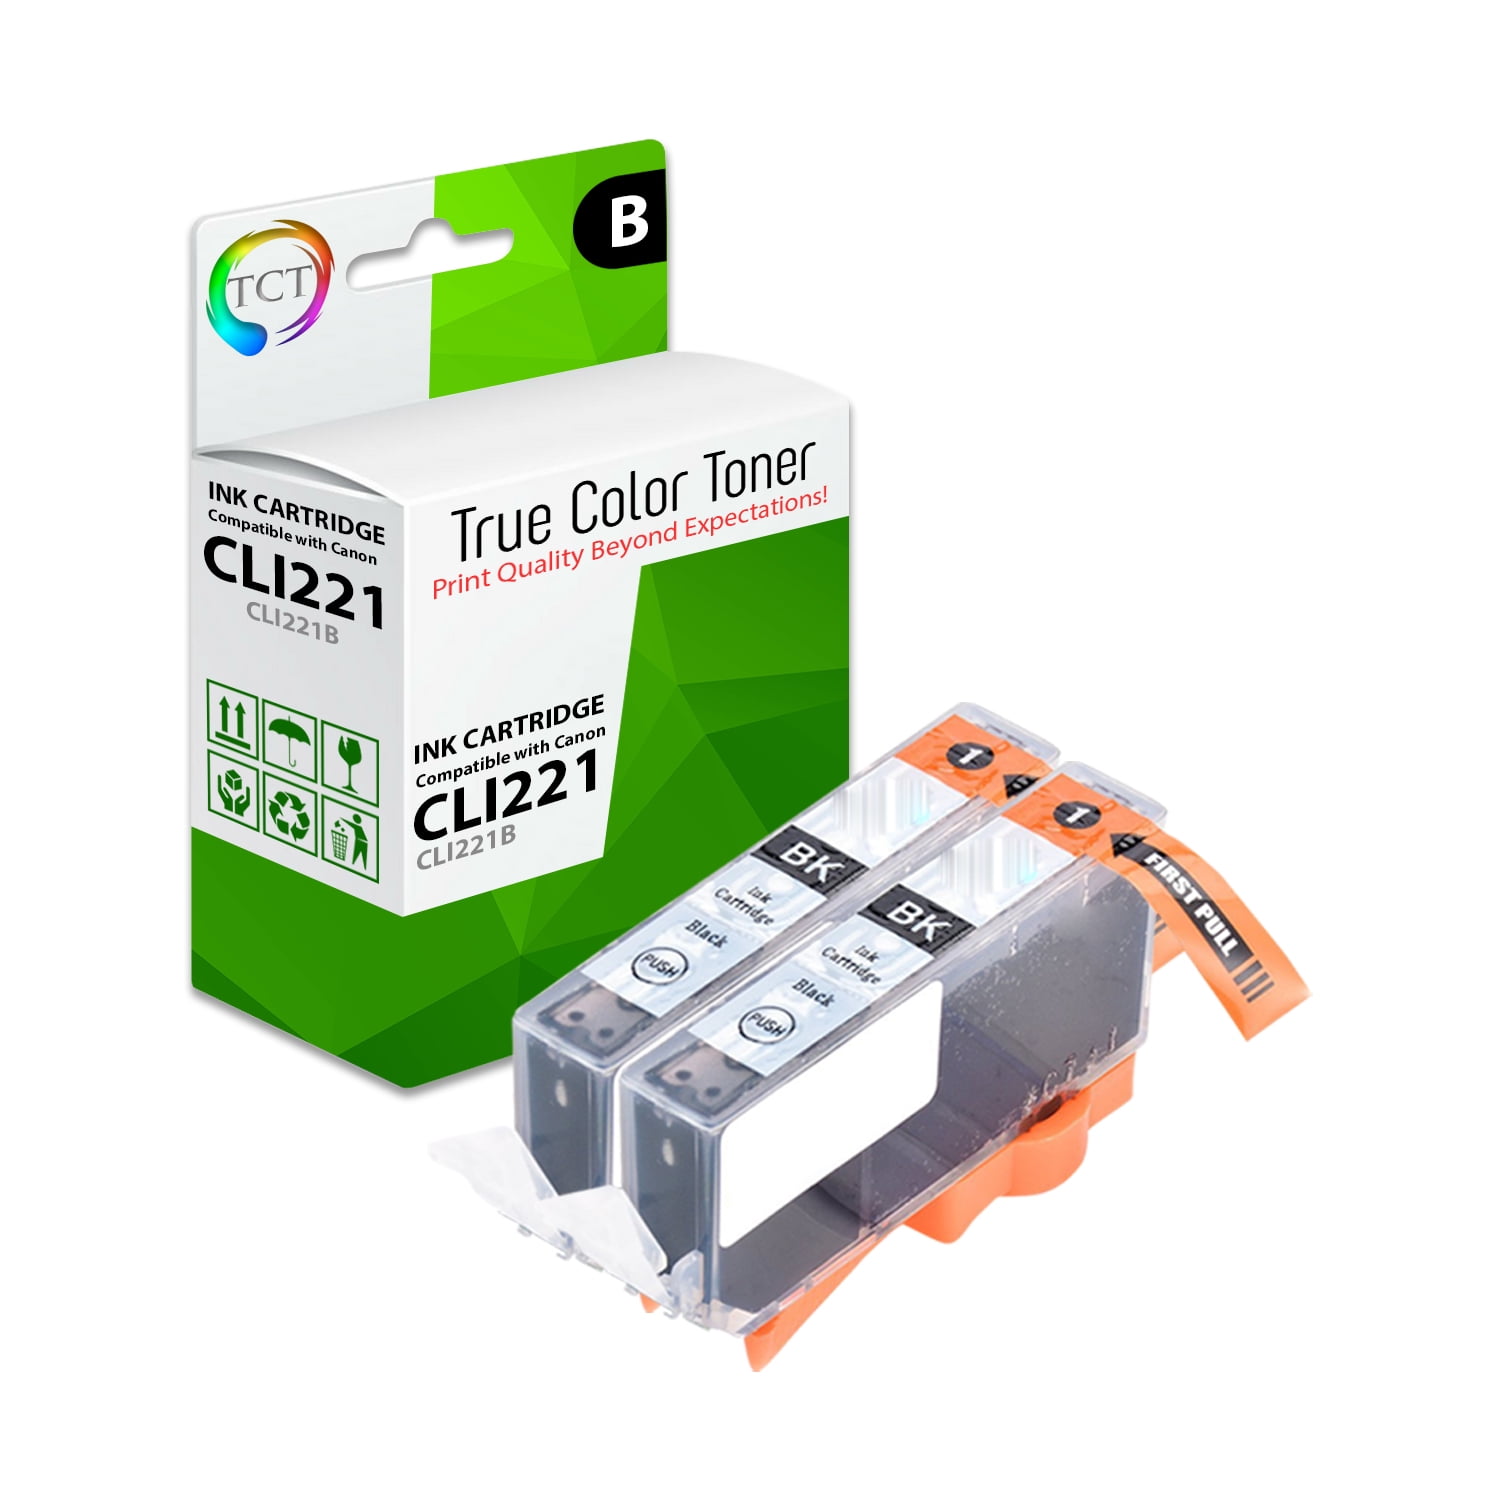 i gang lejlighed Kina TCT Compatible Ink Cartridge Replacement for Canon CLI-221 CLI221 Black  works with Canon Pixma iP3600 iP4600 MP540 MP560 MP620 MP620B MP640 MP980  MP990 MX860 MX870 Printers (500 Pages) - 2 Pack - Walmart.com